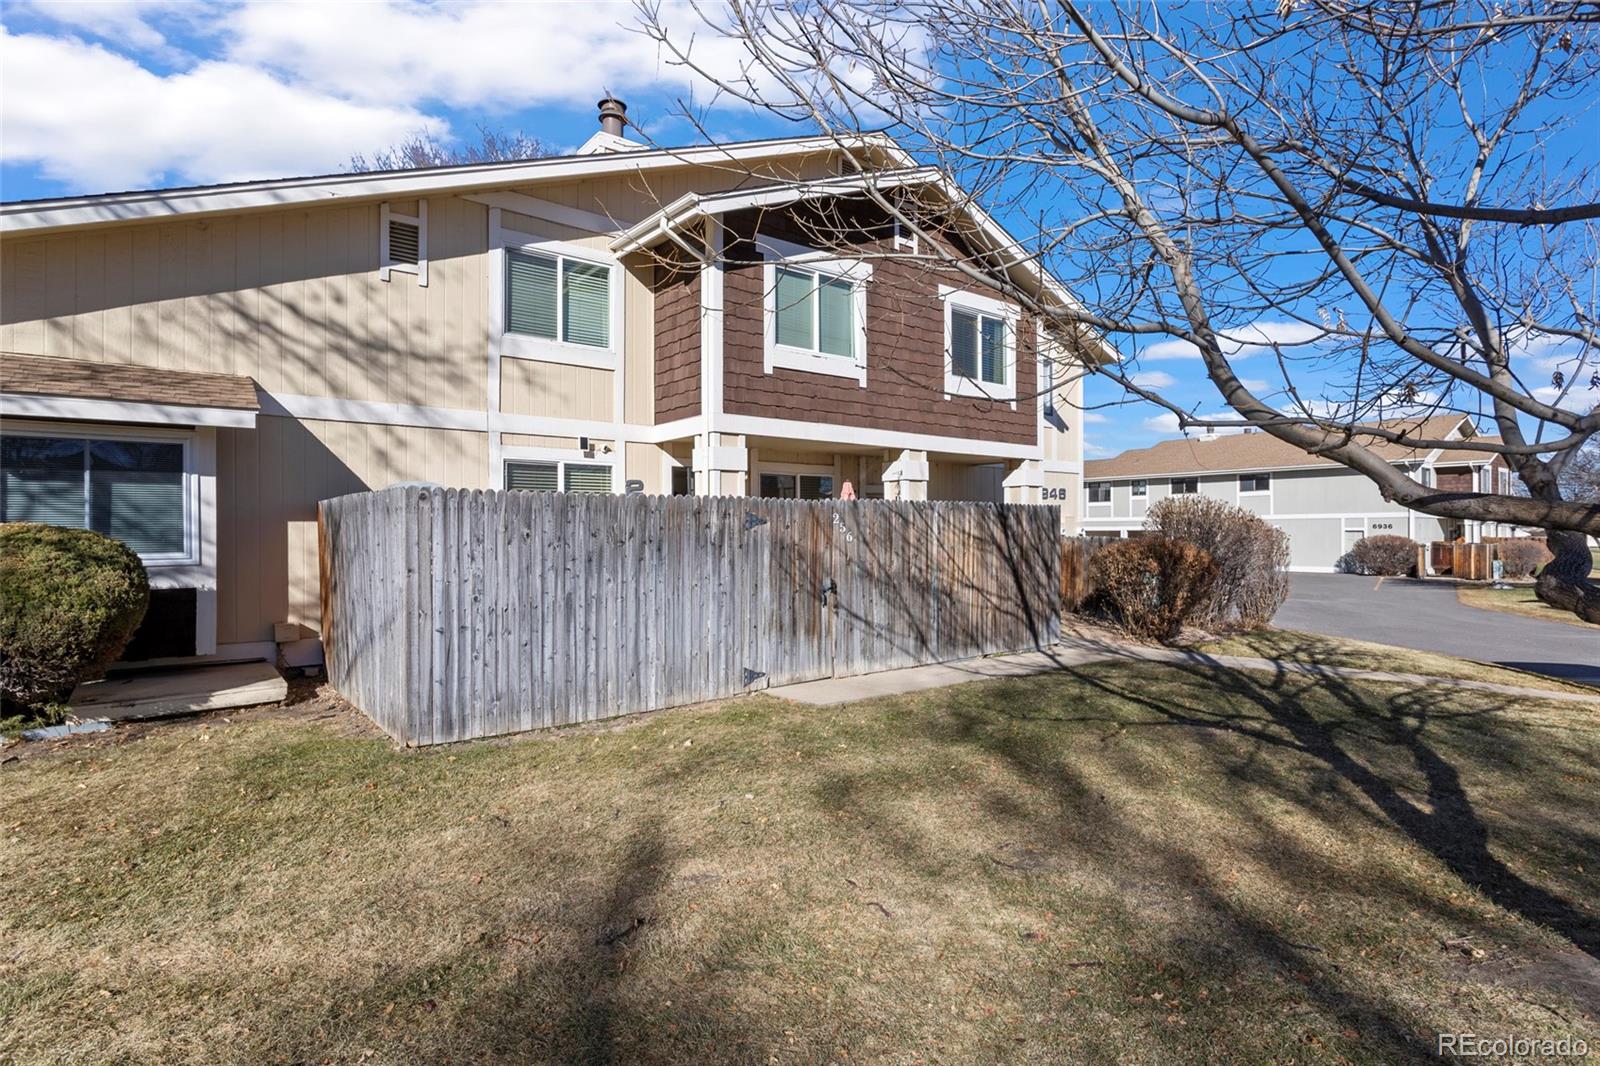 6946 w 87th way, Arvada sold home. Closed on 2024-03-29 for $372,000.